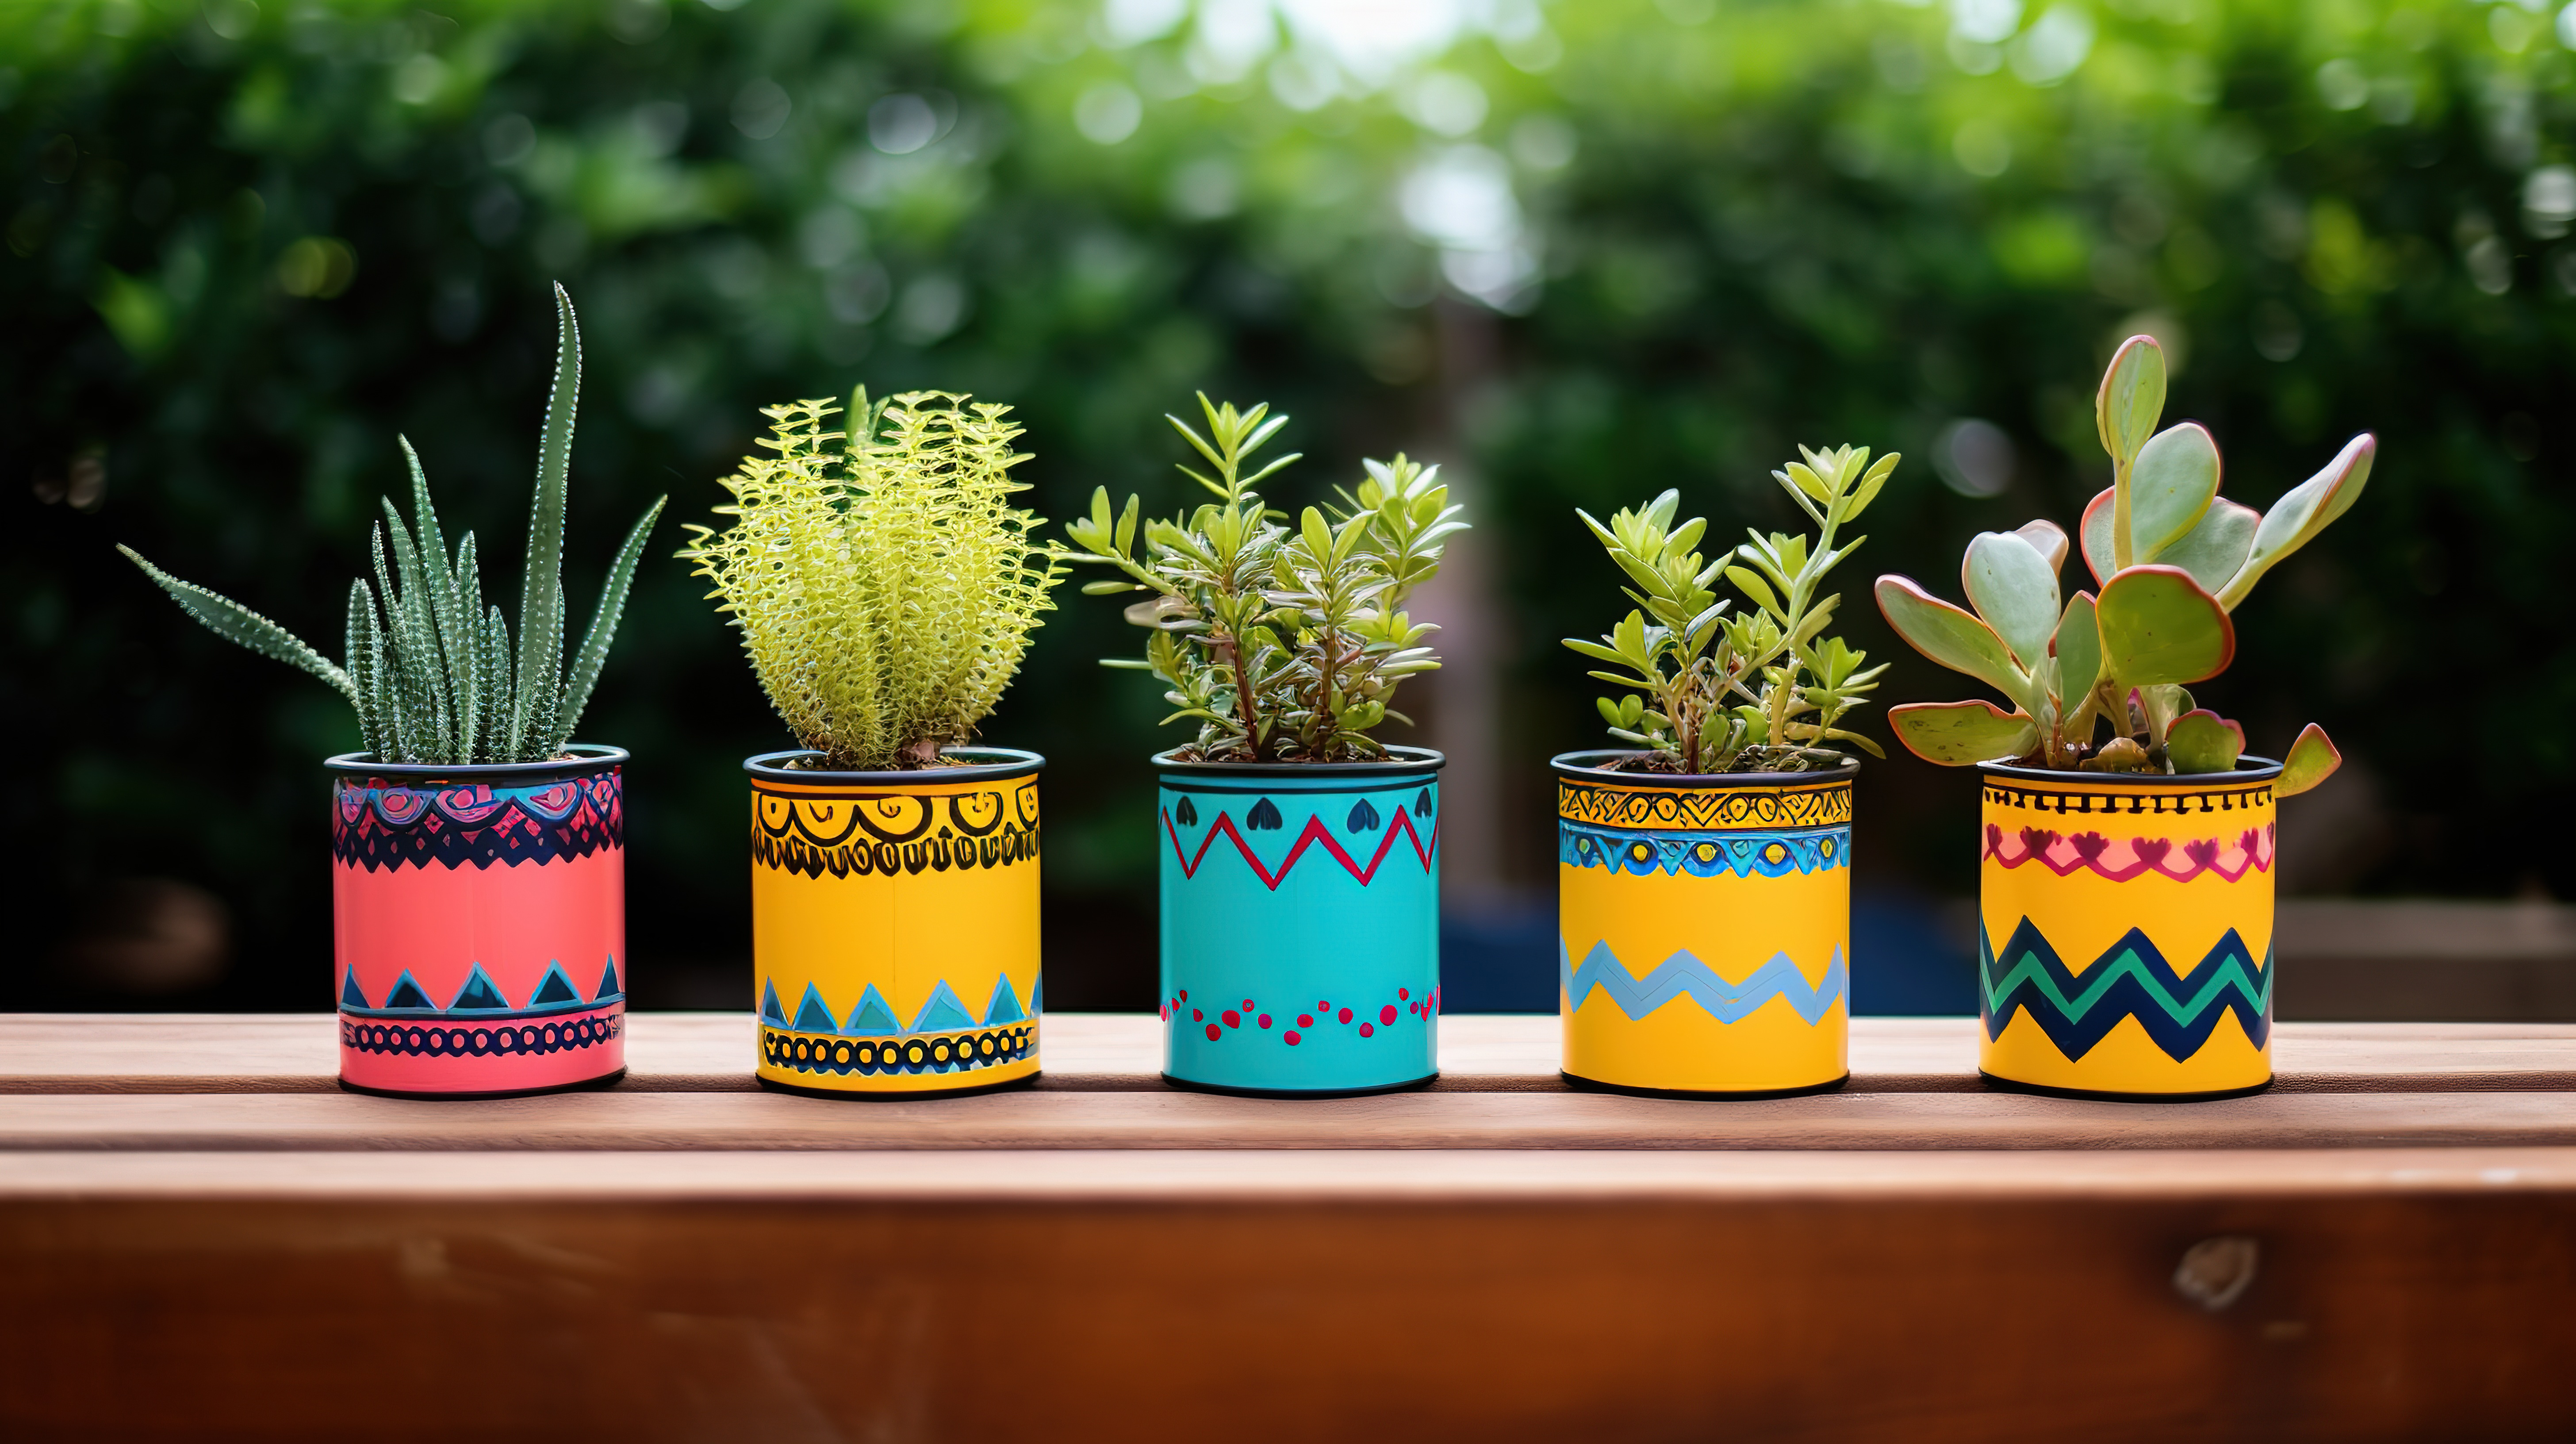 Upcycled Planters from tin cans